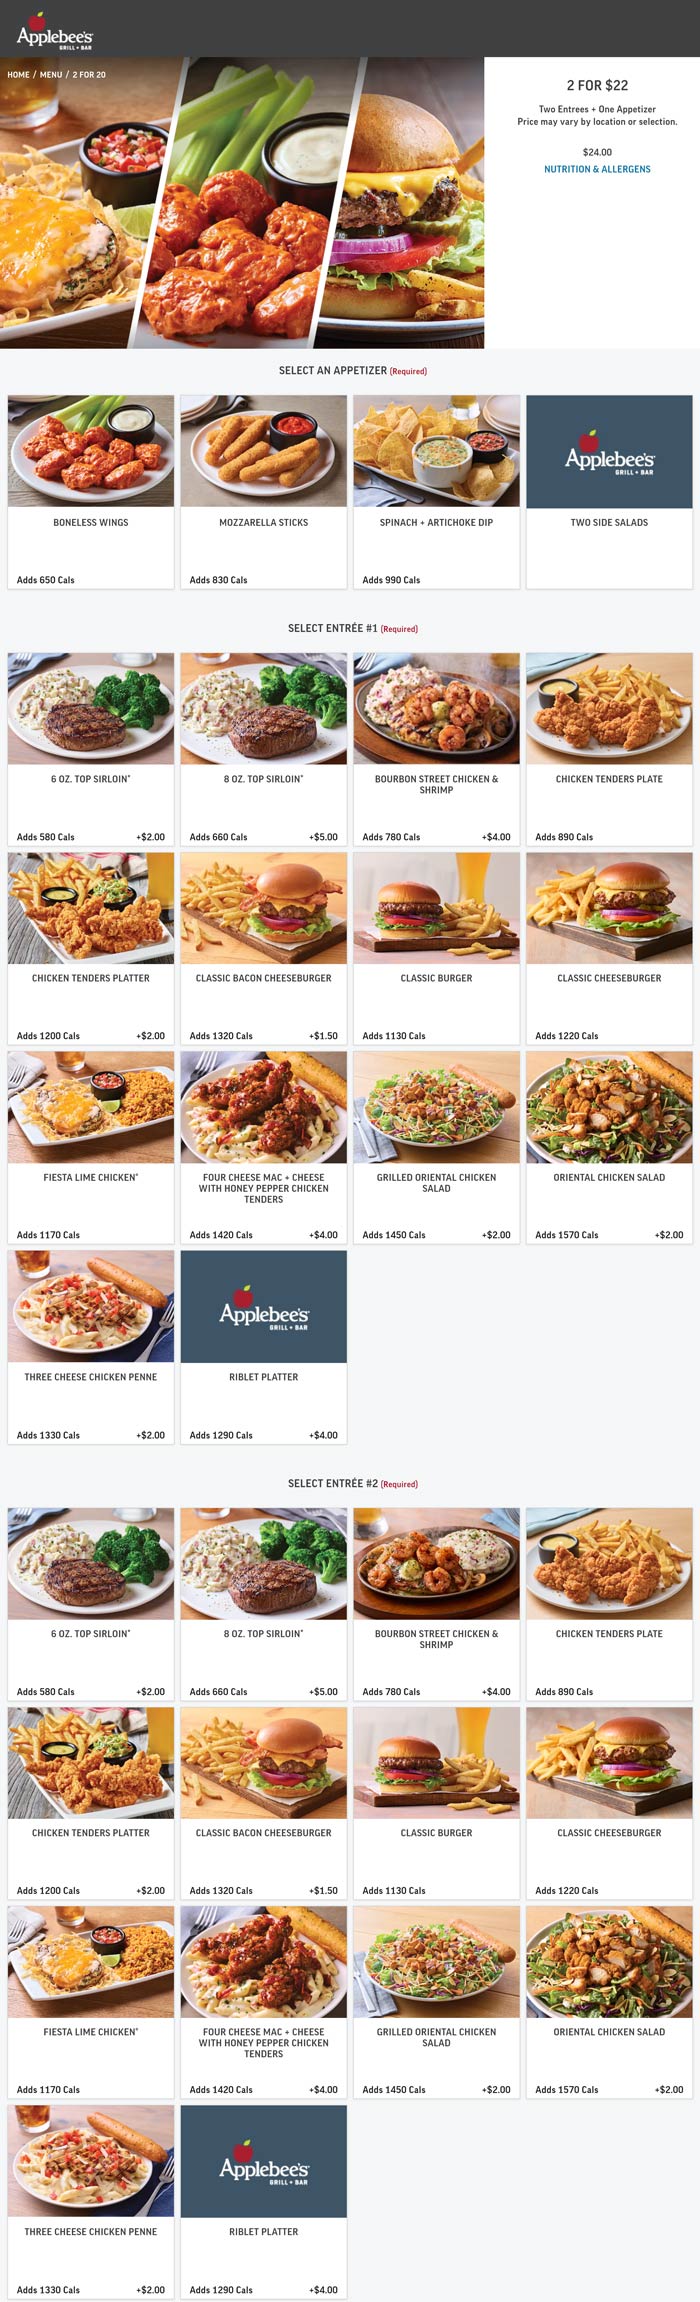 Applebees coupons & promo code for [January 2022]